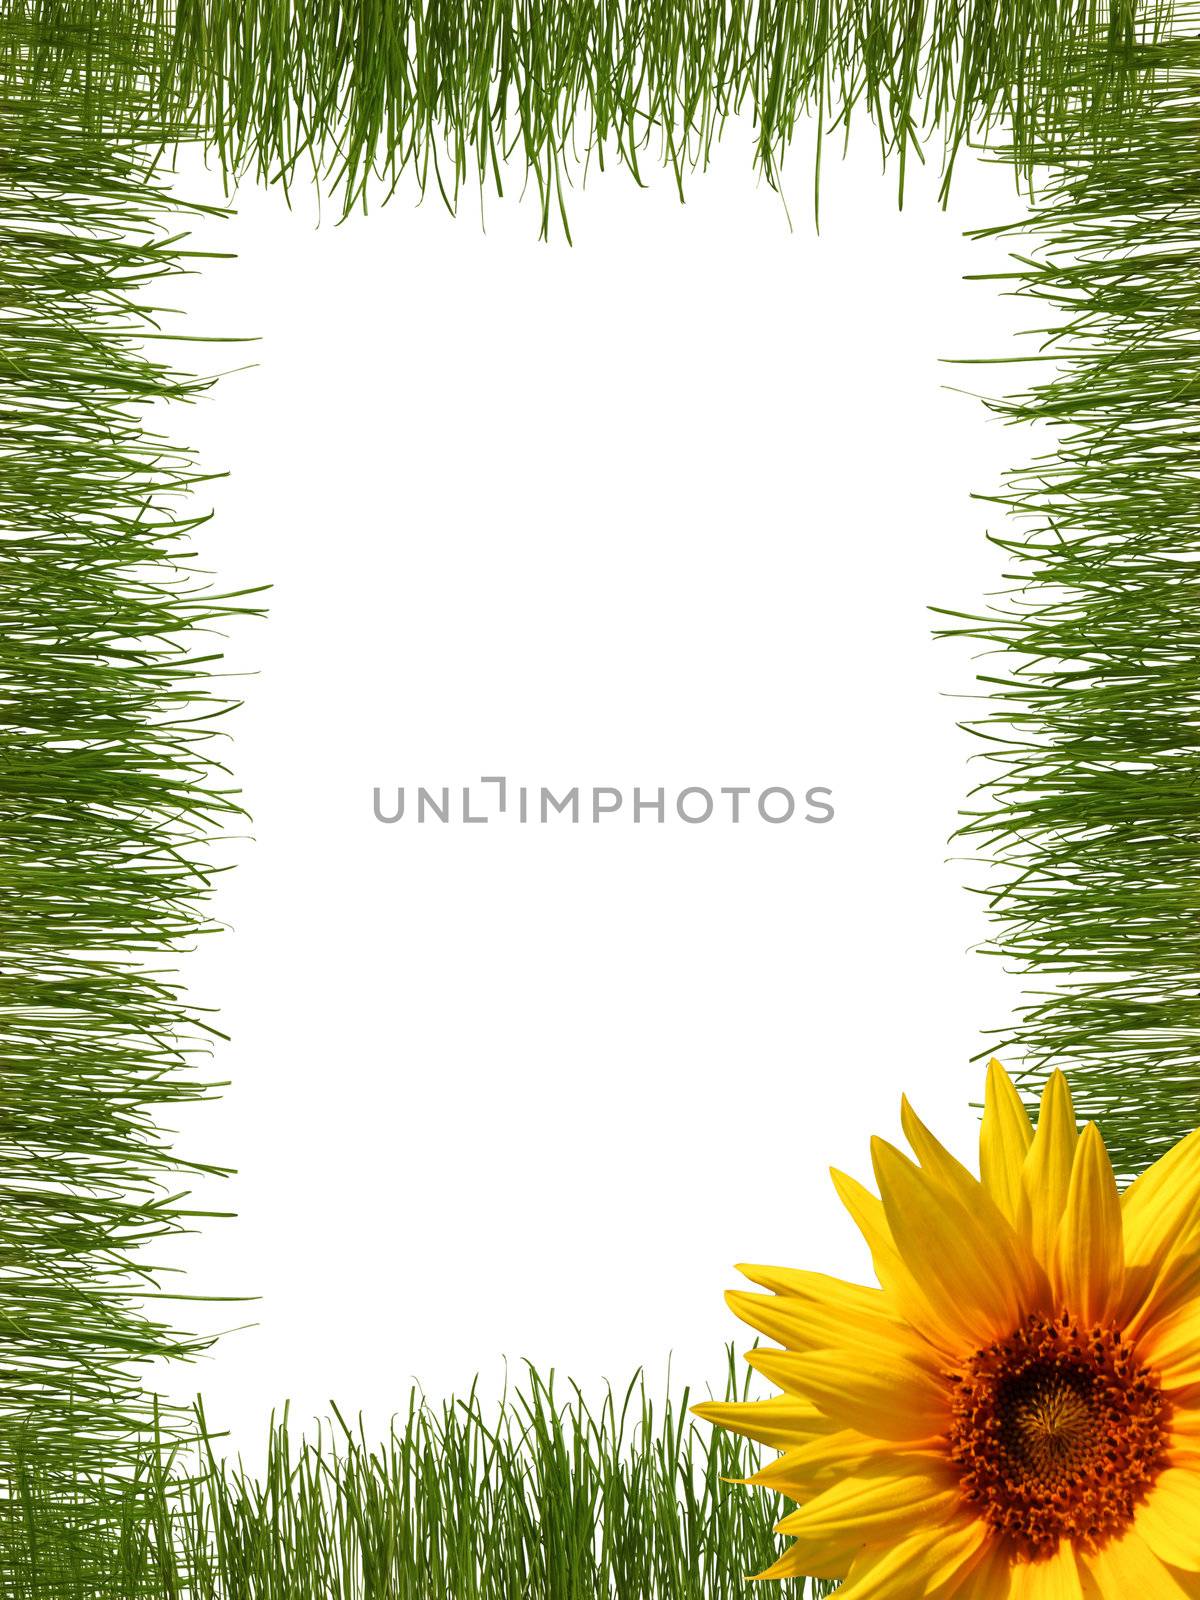 AN image of Green grass frame on white